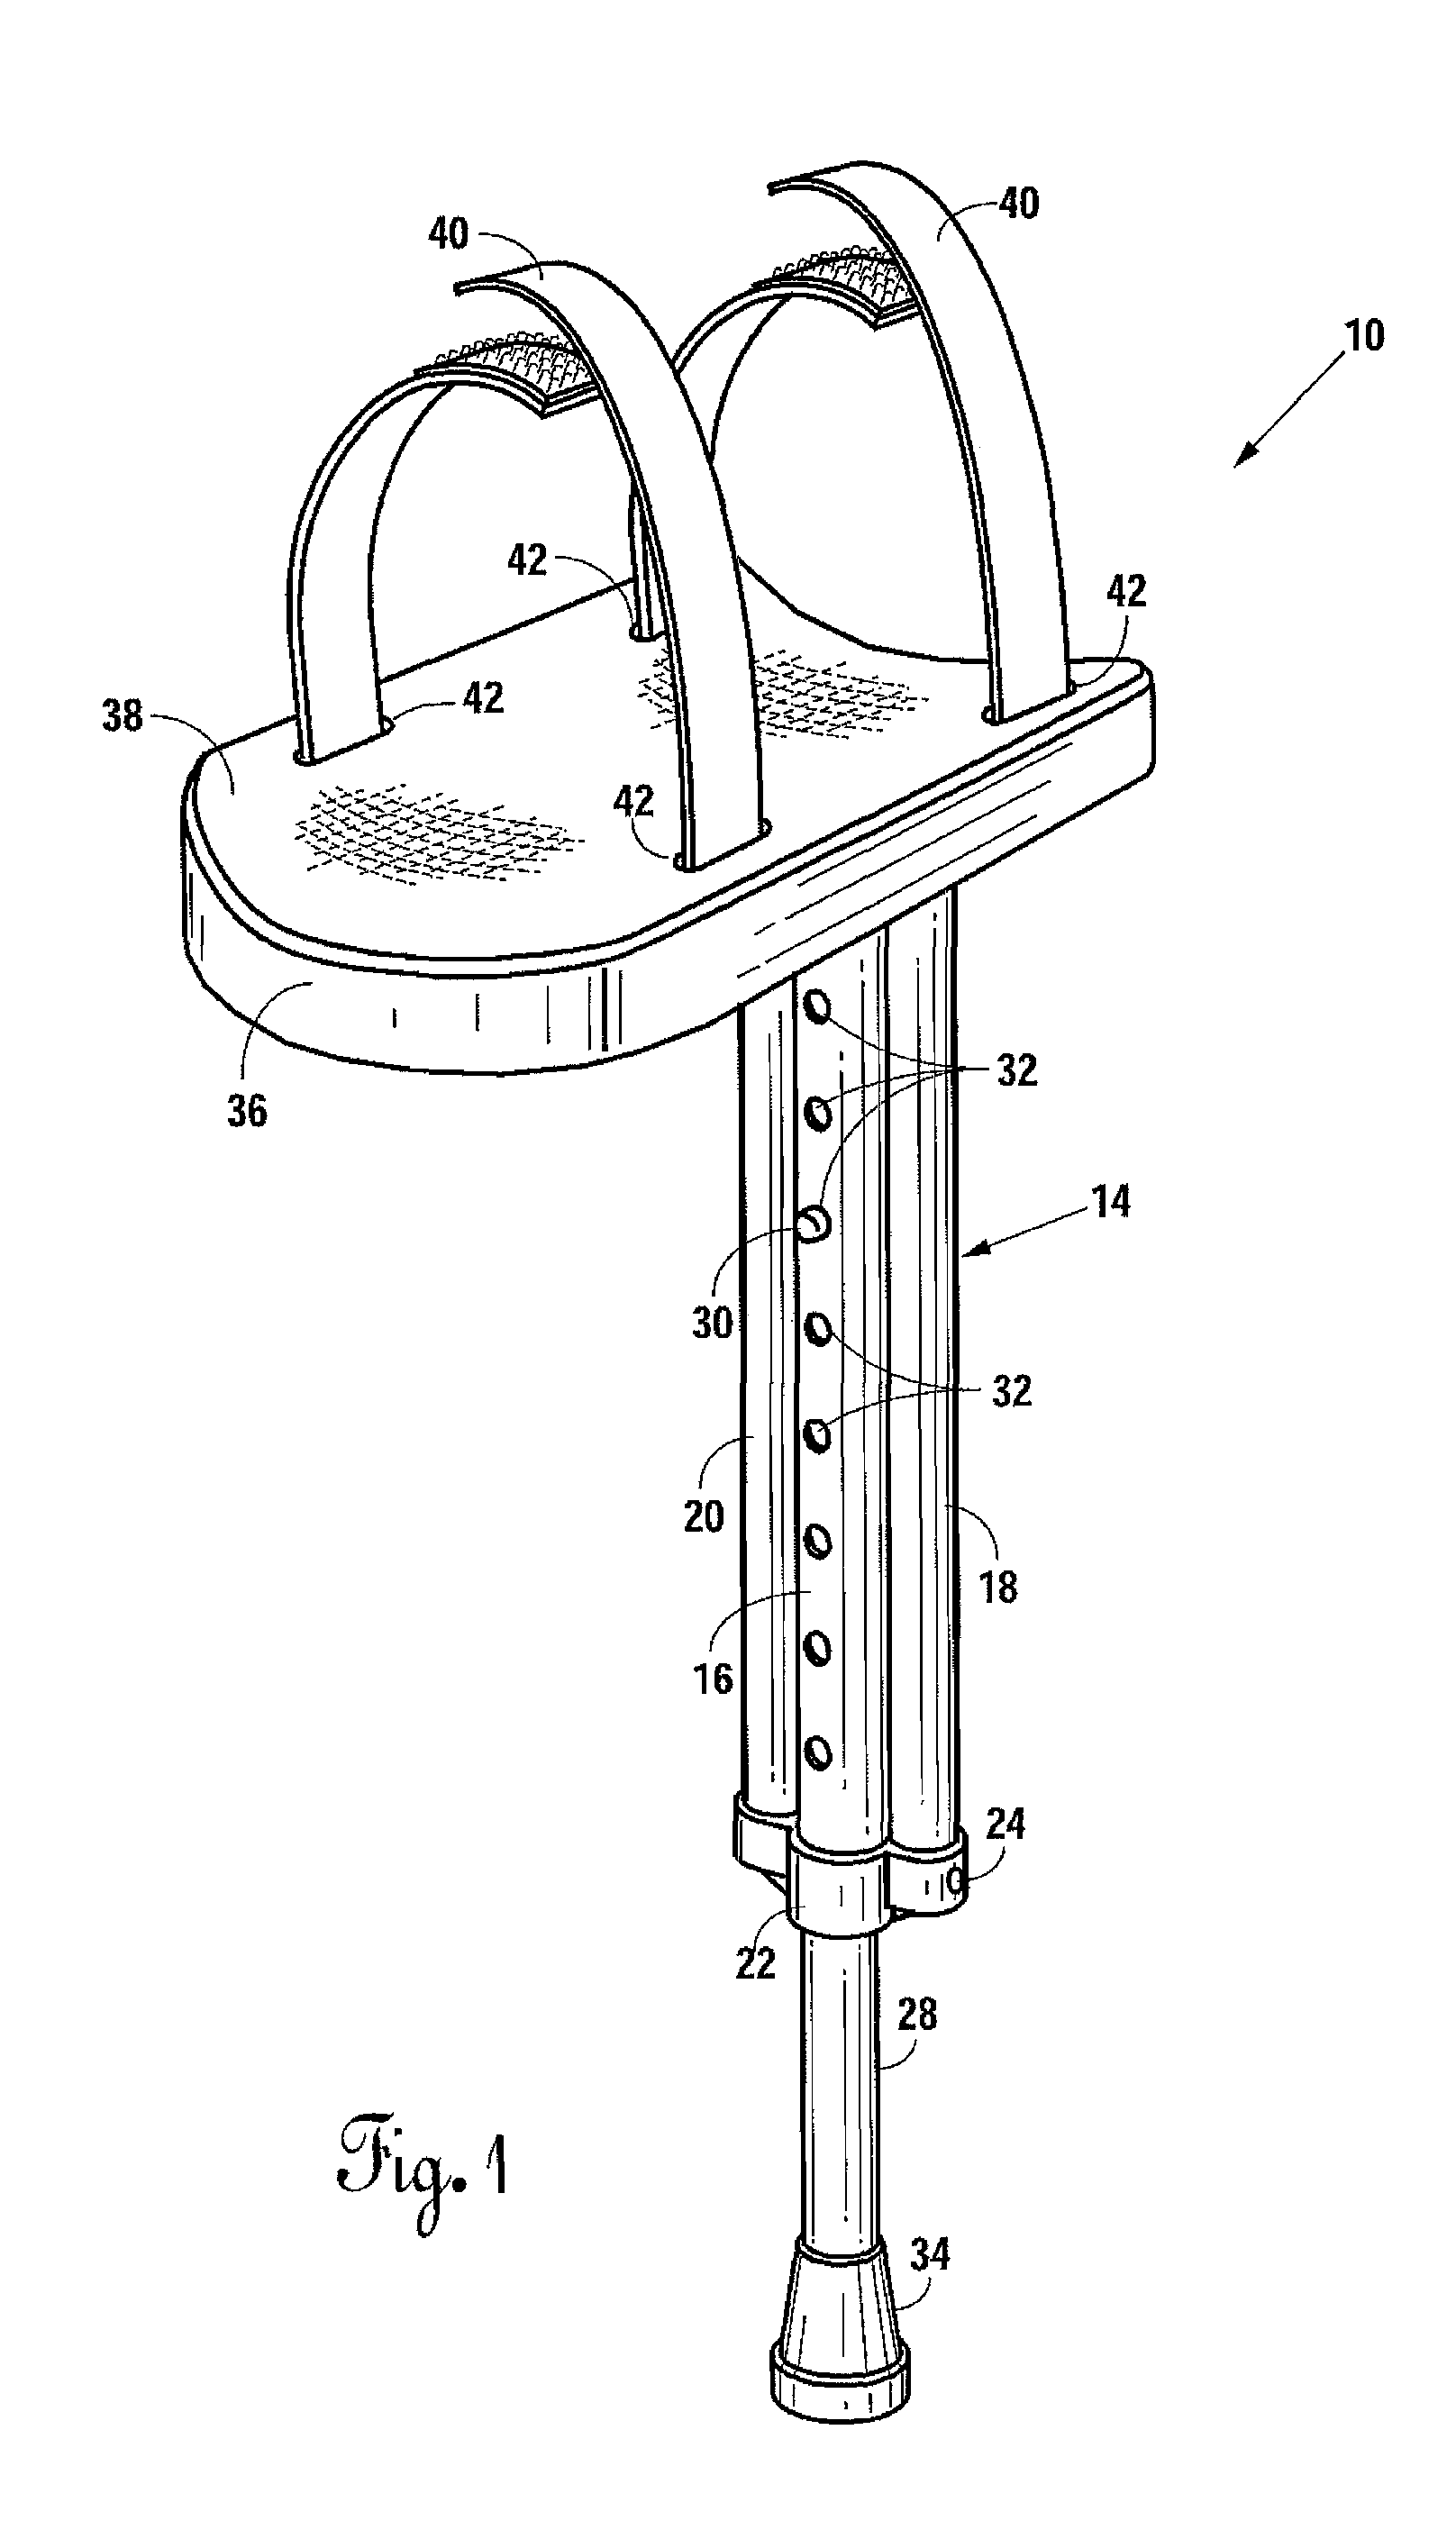 Adjustable Support For A Residual Limb Of An Amputee